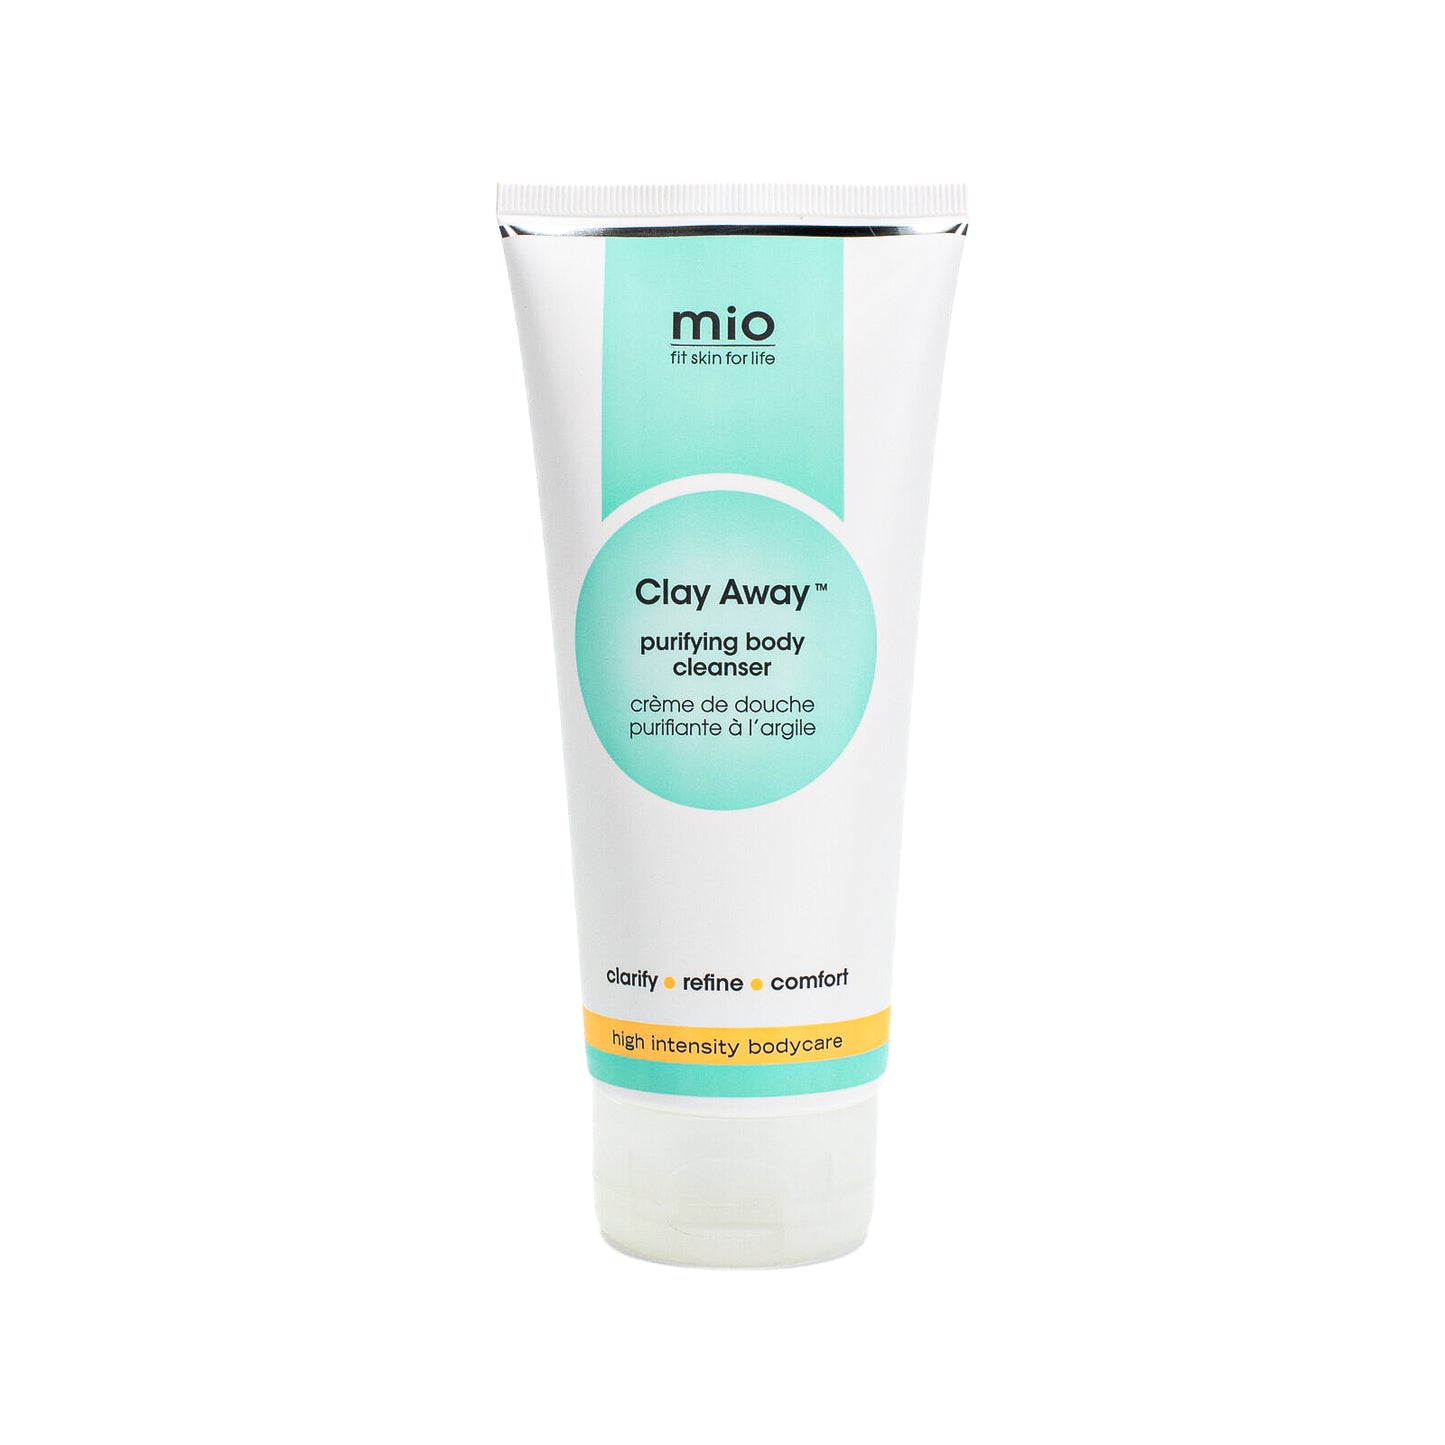 mio Clay Away Purifying Body Cleanser 6.7oz - Imperfect Box